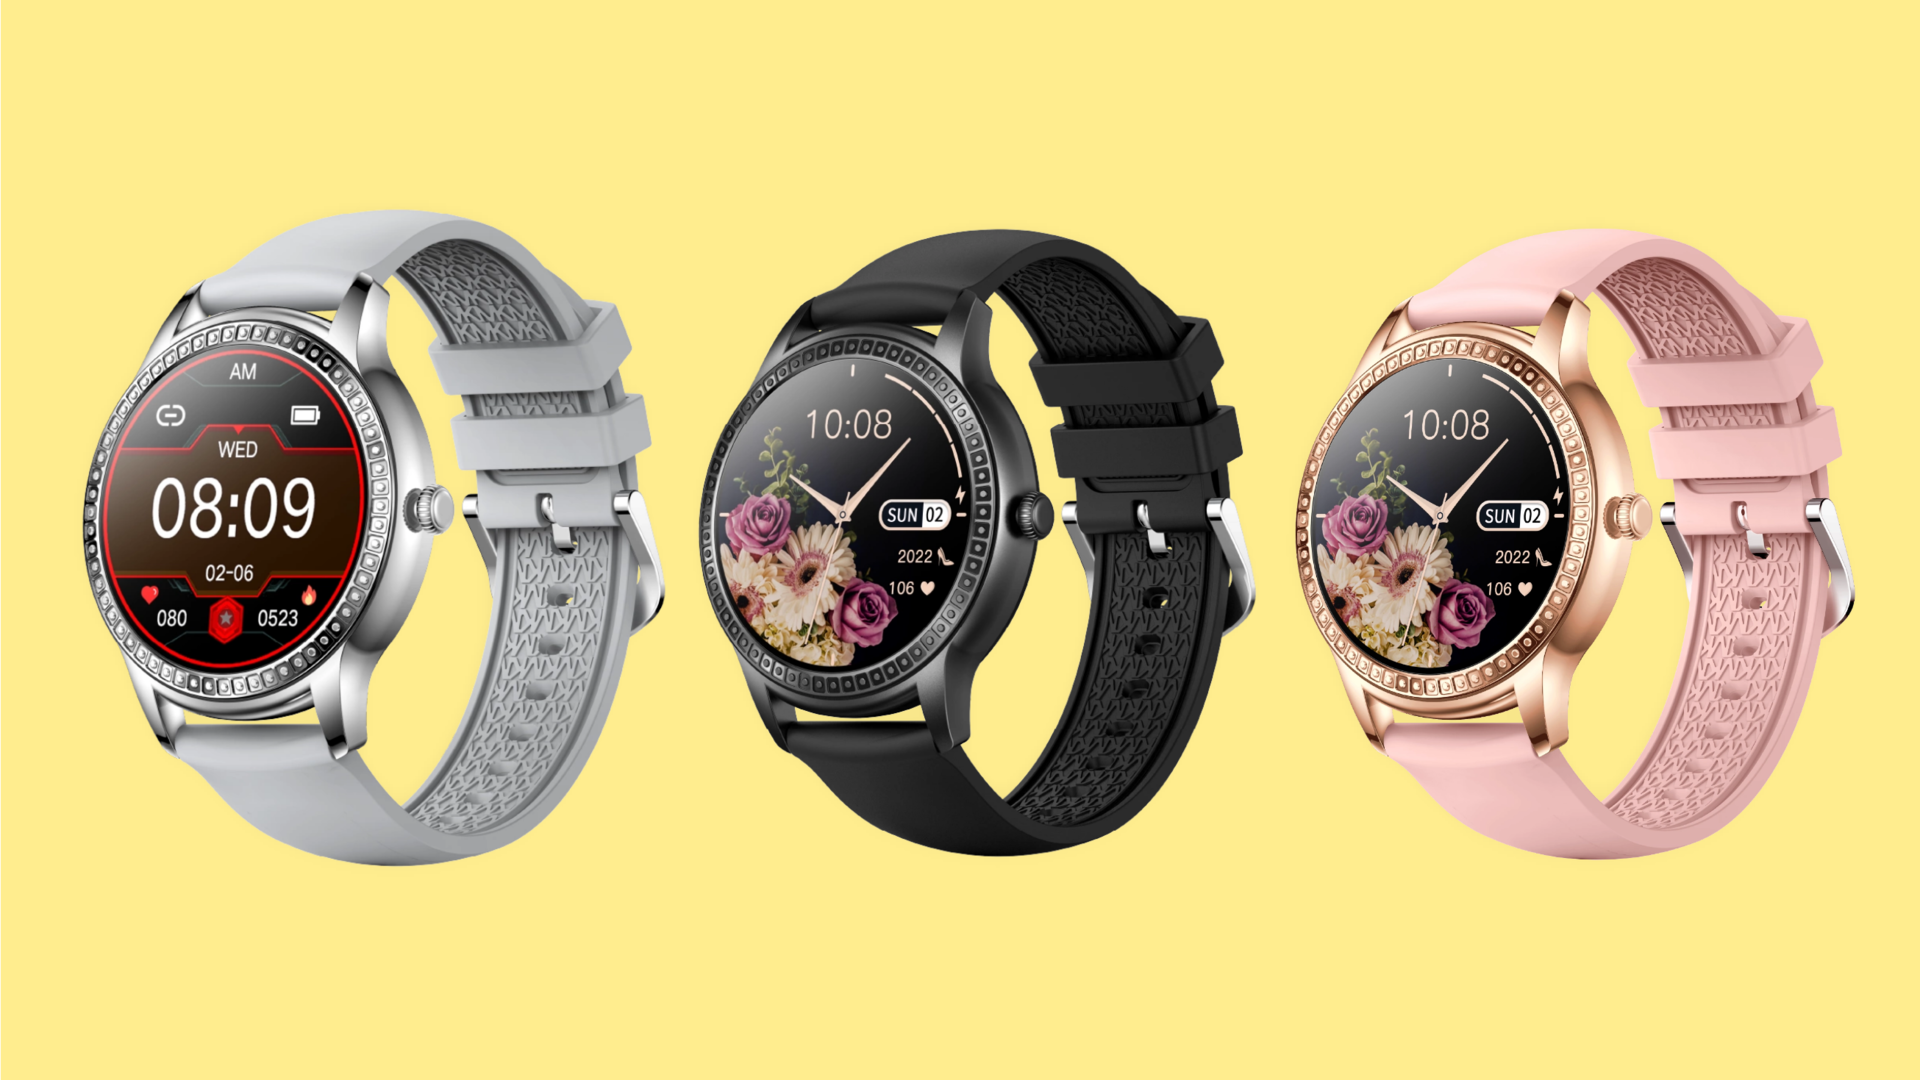 HapiPola launches its Floral smartwatch geared toward women: Check price